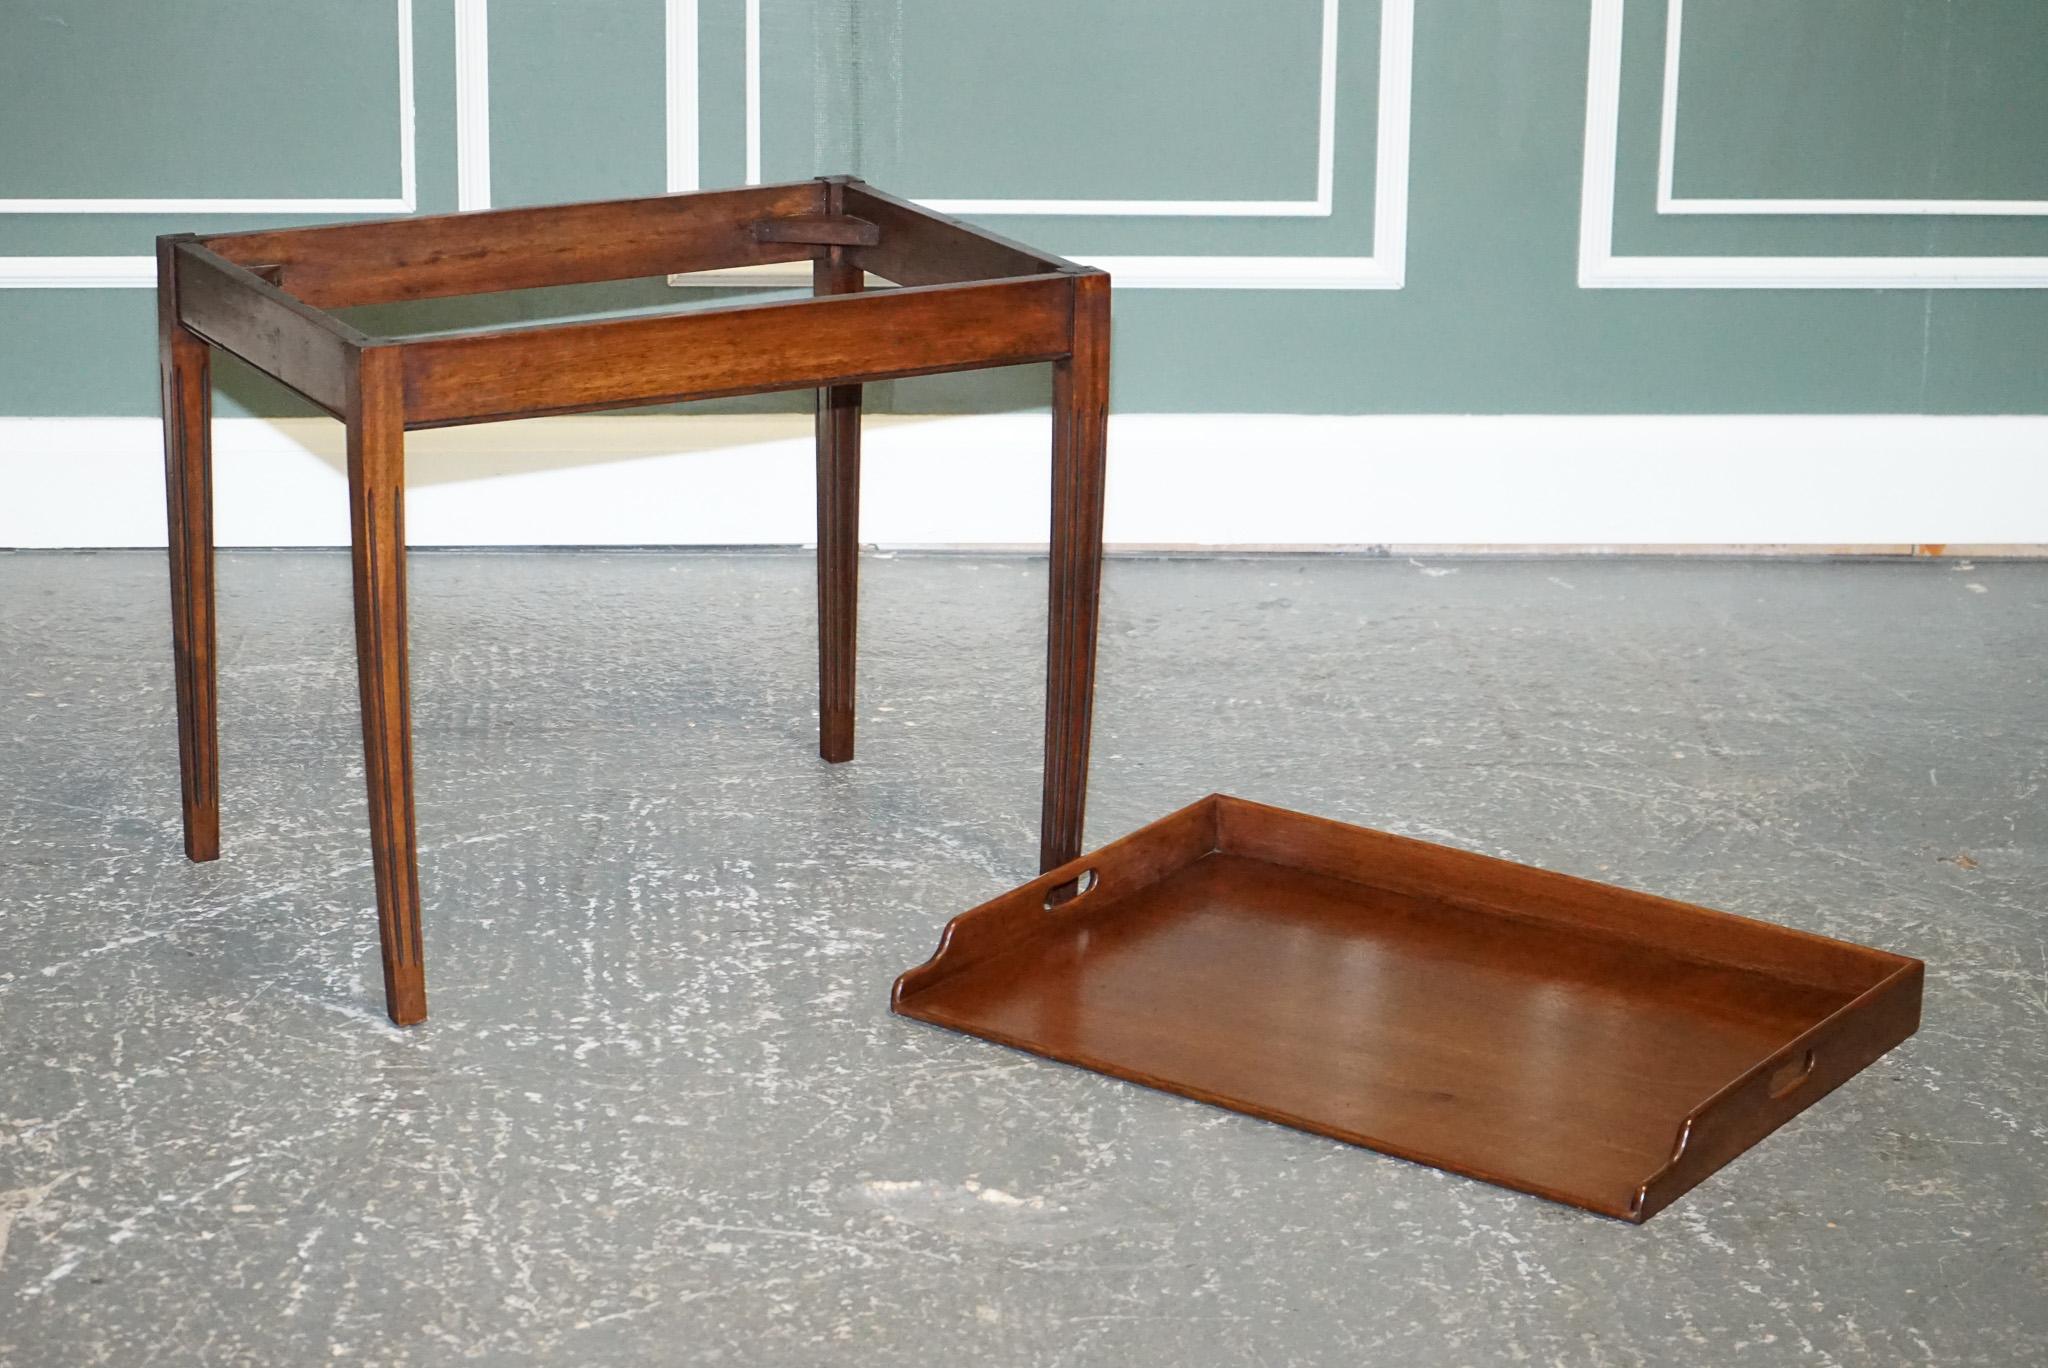 We are delighted to offer for sale this Lovely Antique Butler Mahogany Table.

Please carefully examine the pictures to see the condition before purchasing, as they form part of the description. If you have any questions, please message us.